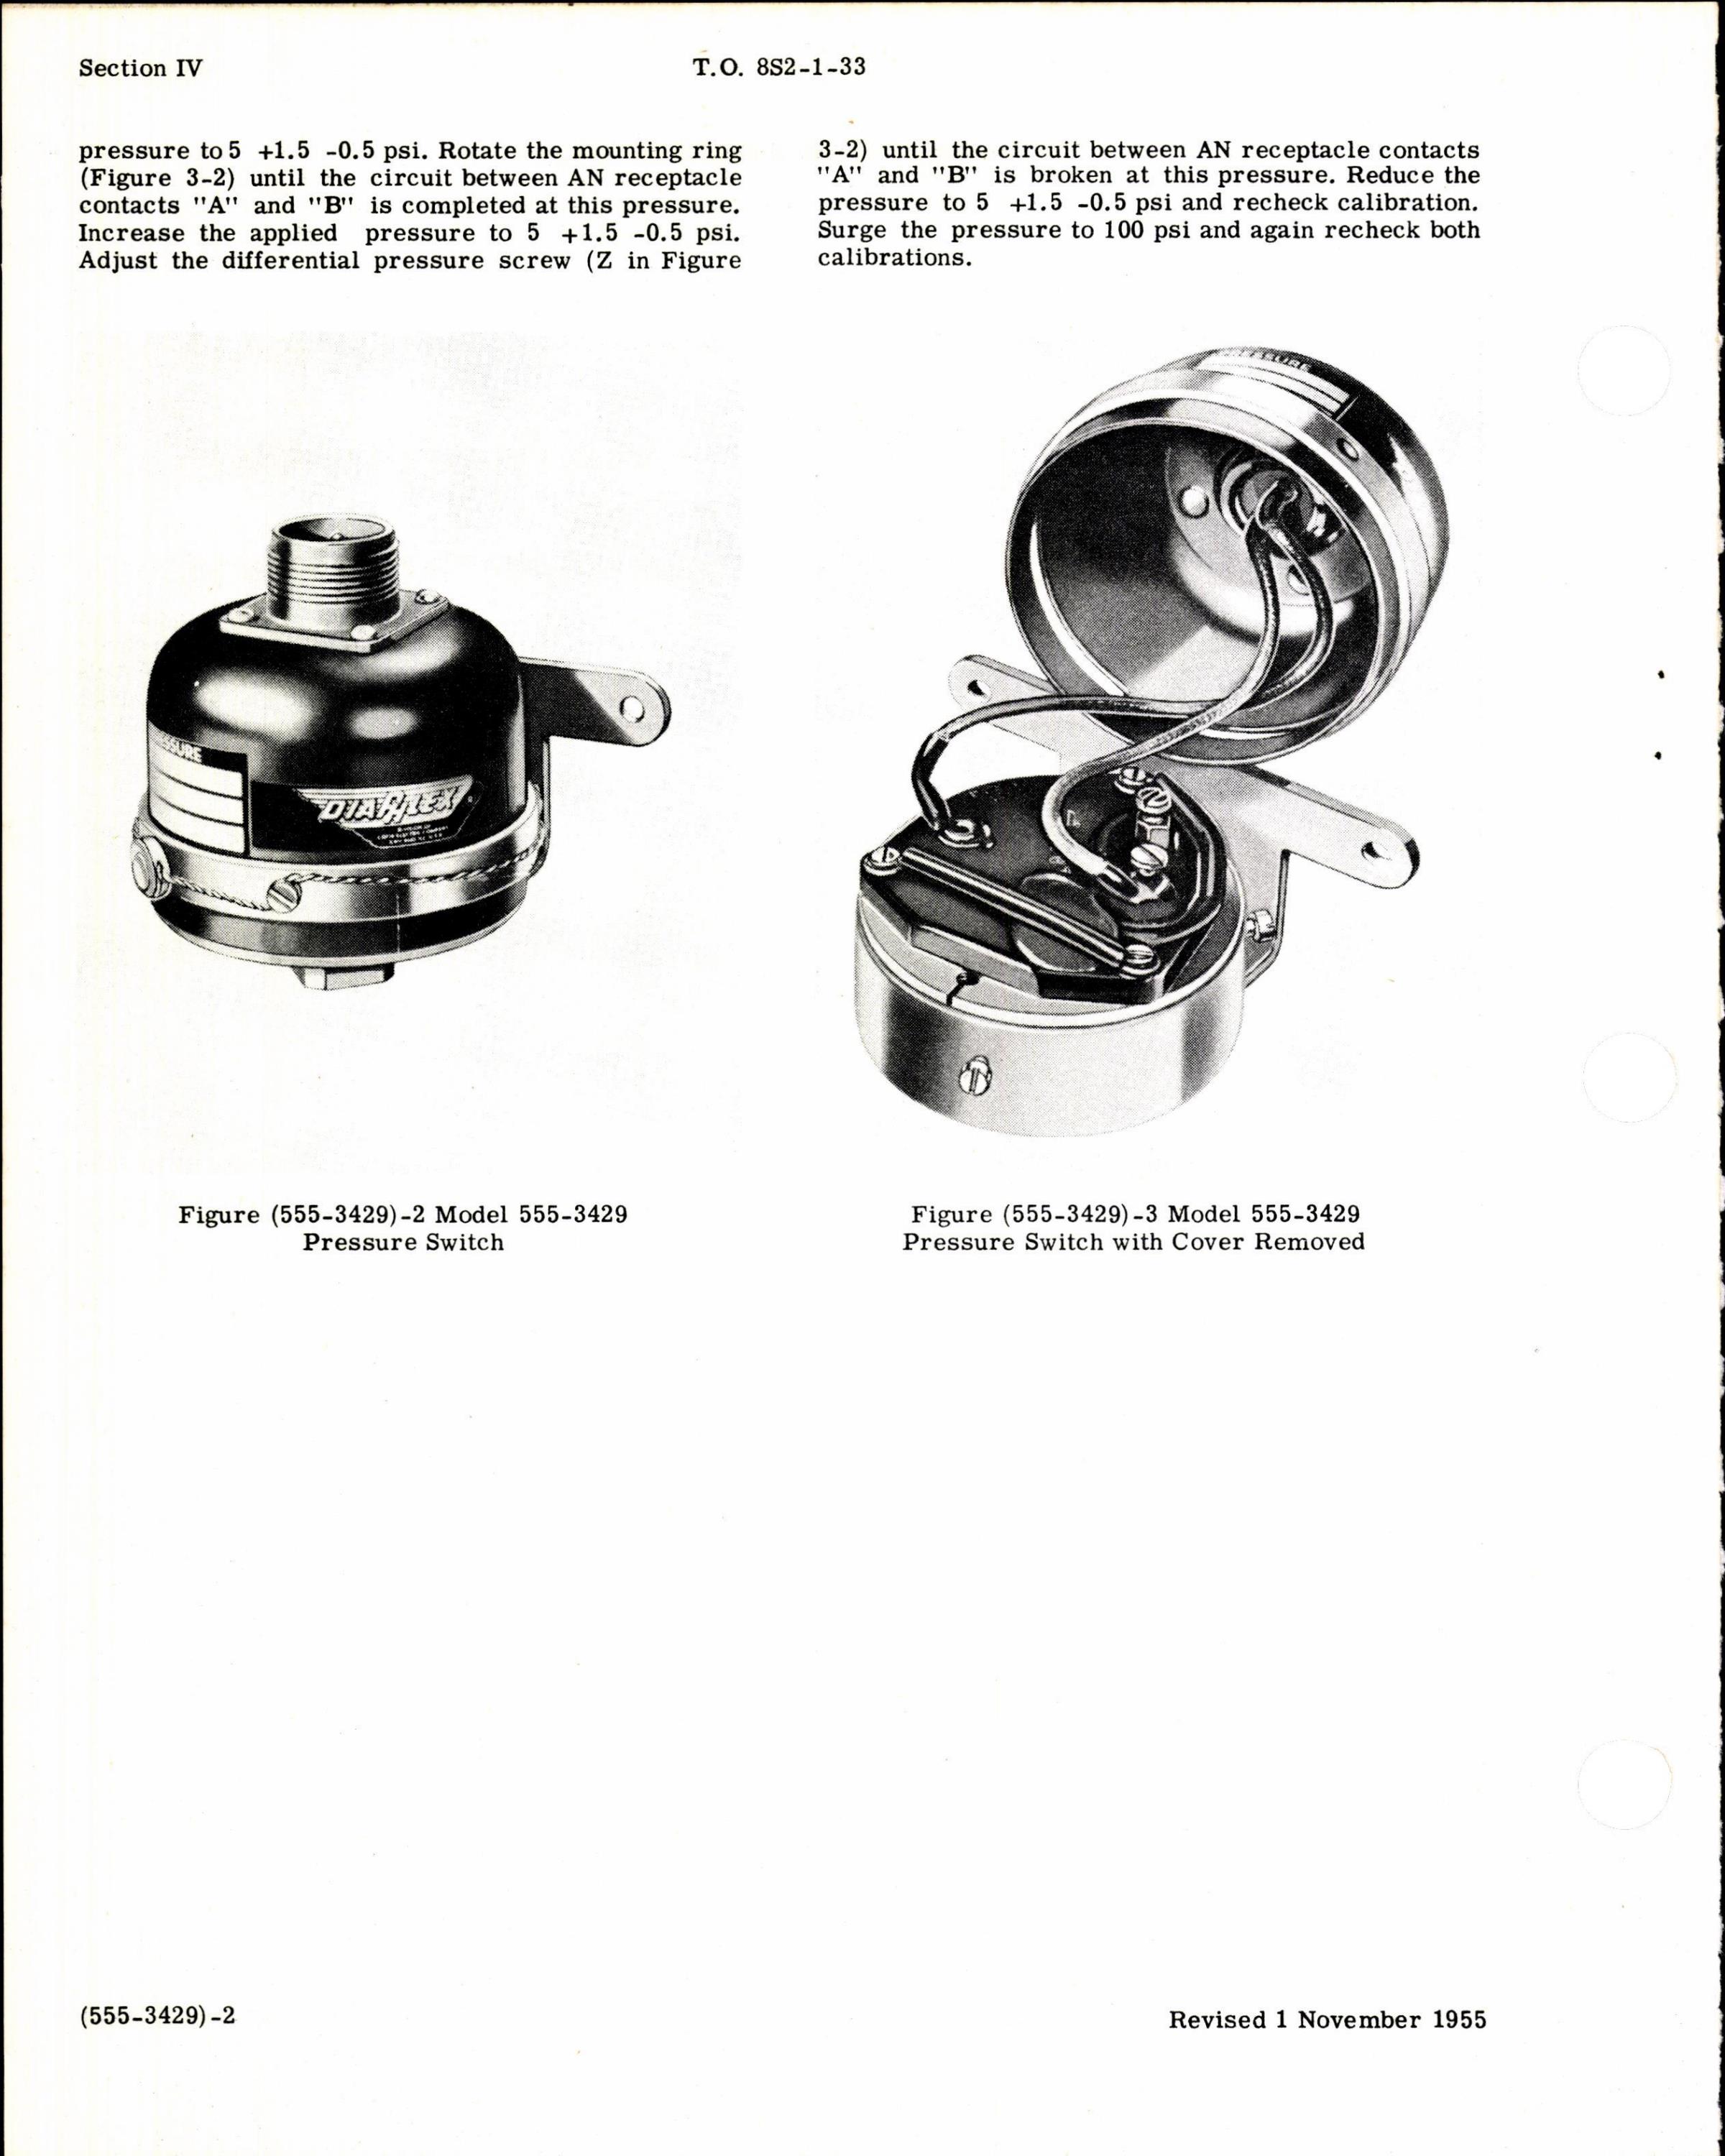 Sample page 8 from AirCorps Library document: Overhaul Instructions for Cook Pressure Control Switches